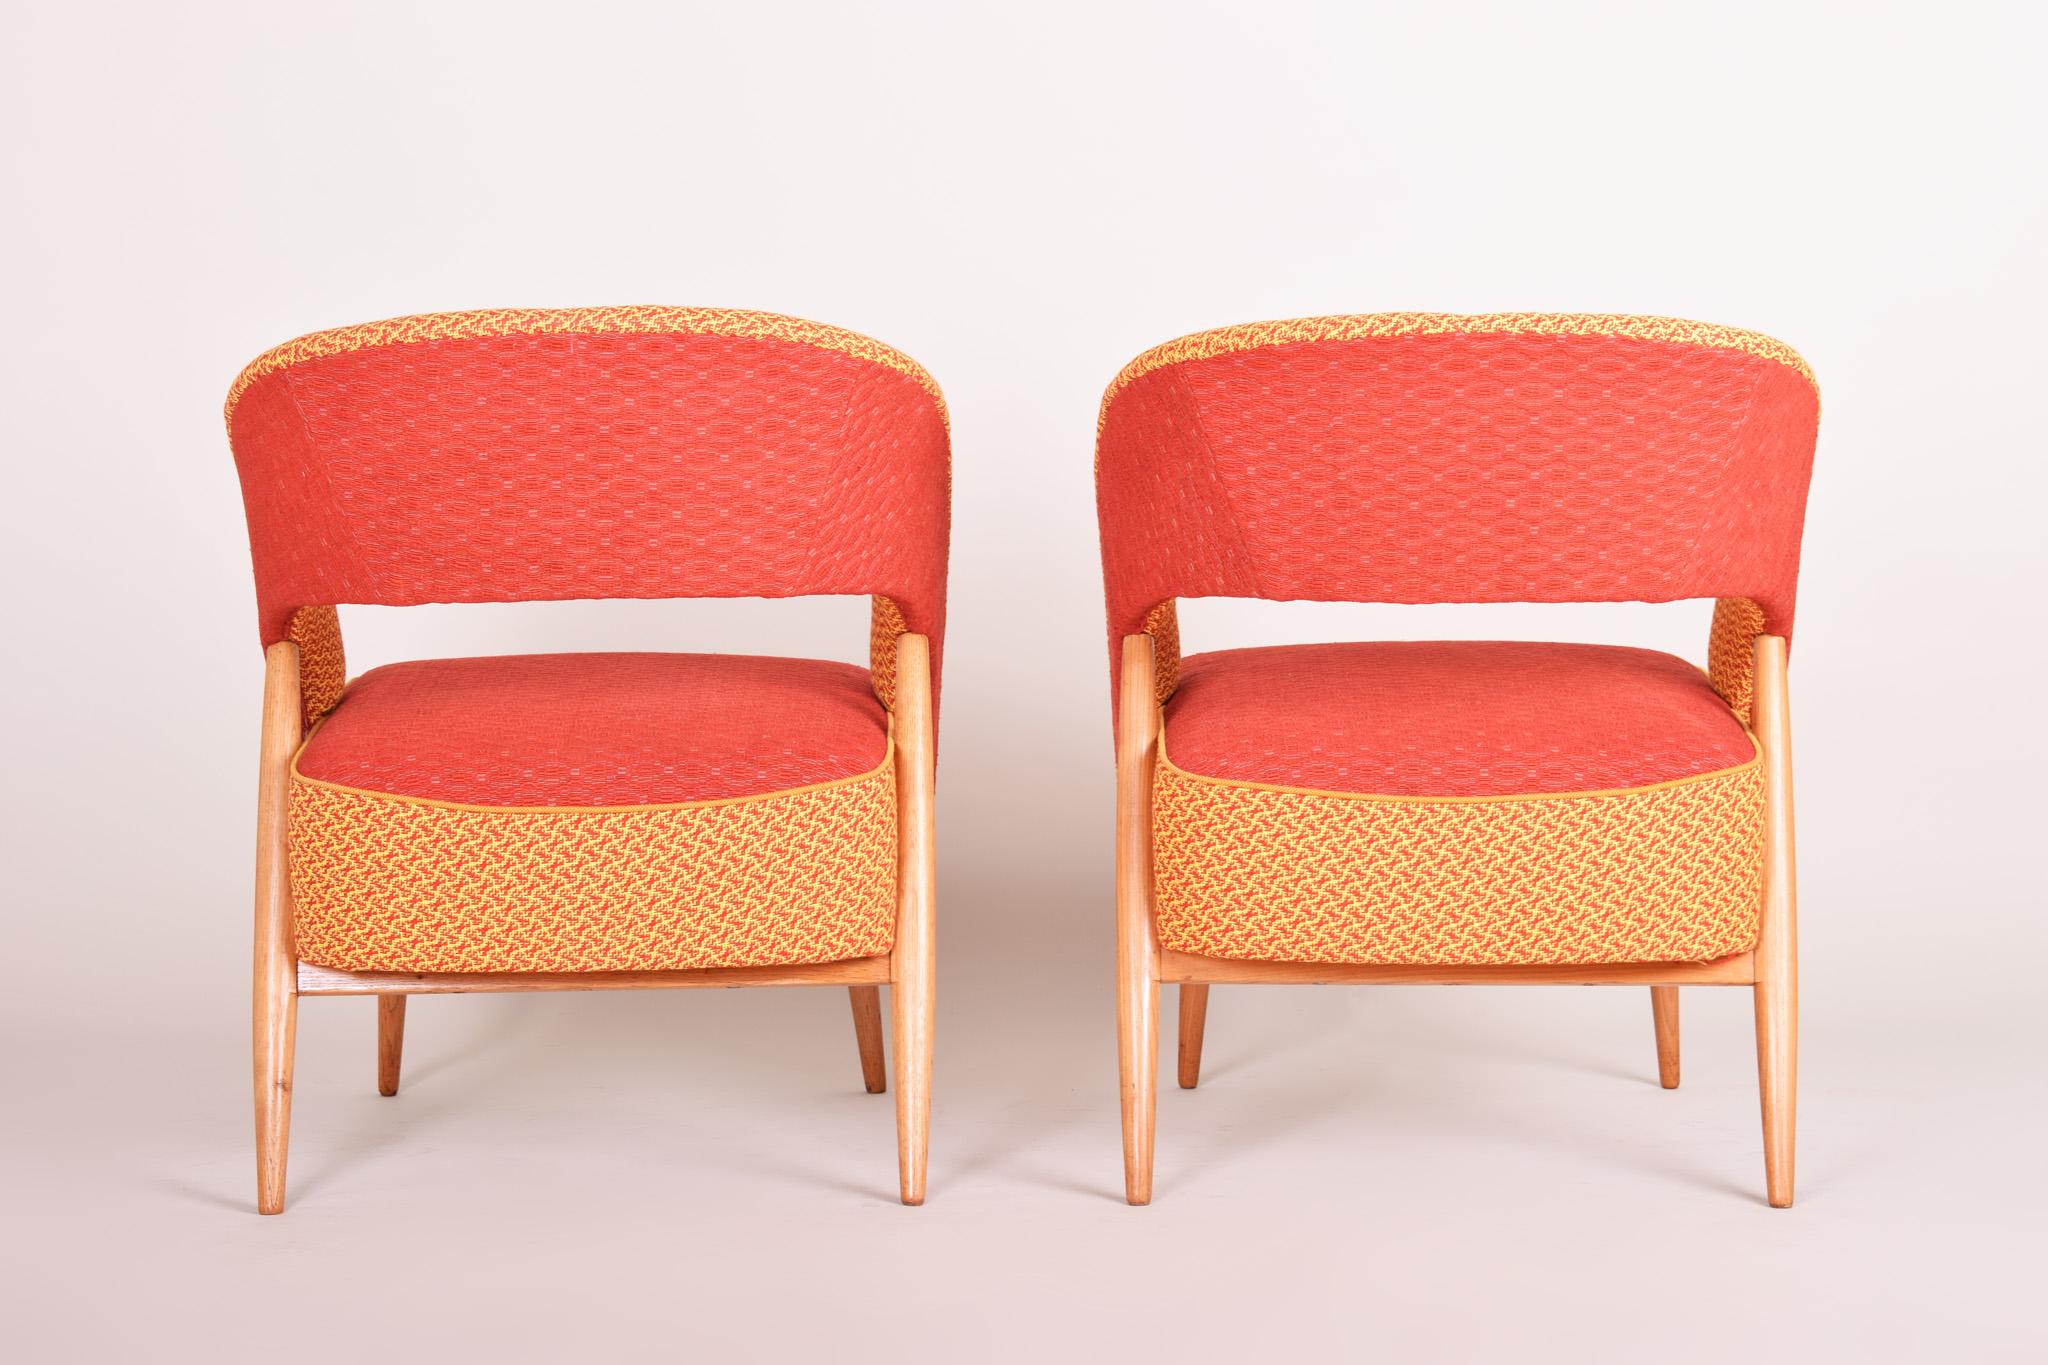 Mid-Century Modern Mid Century Red and Orange Chairs, Made in 1940s, Czechia, Restored by Our Team For Sale